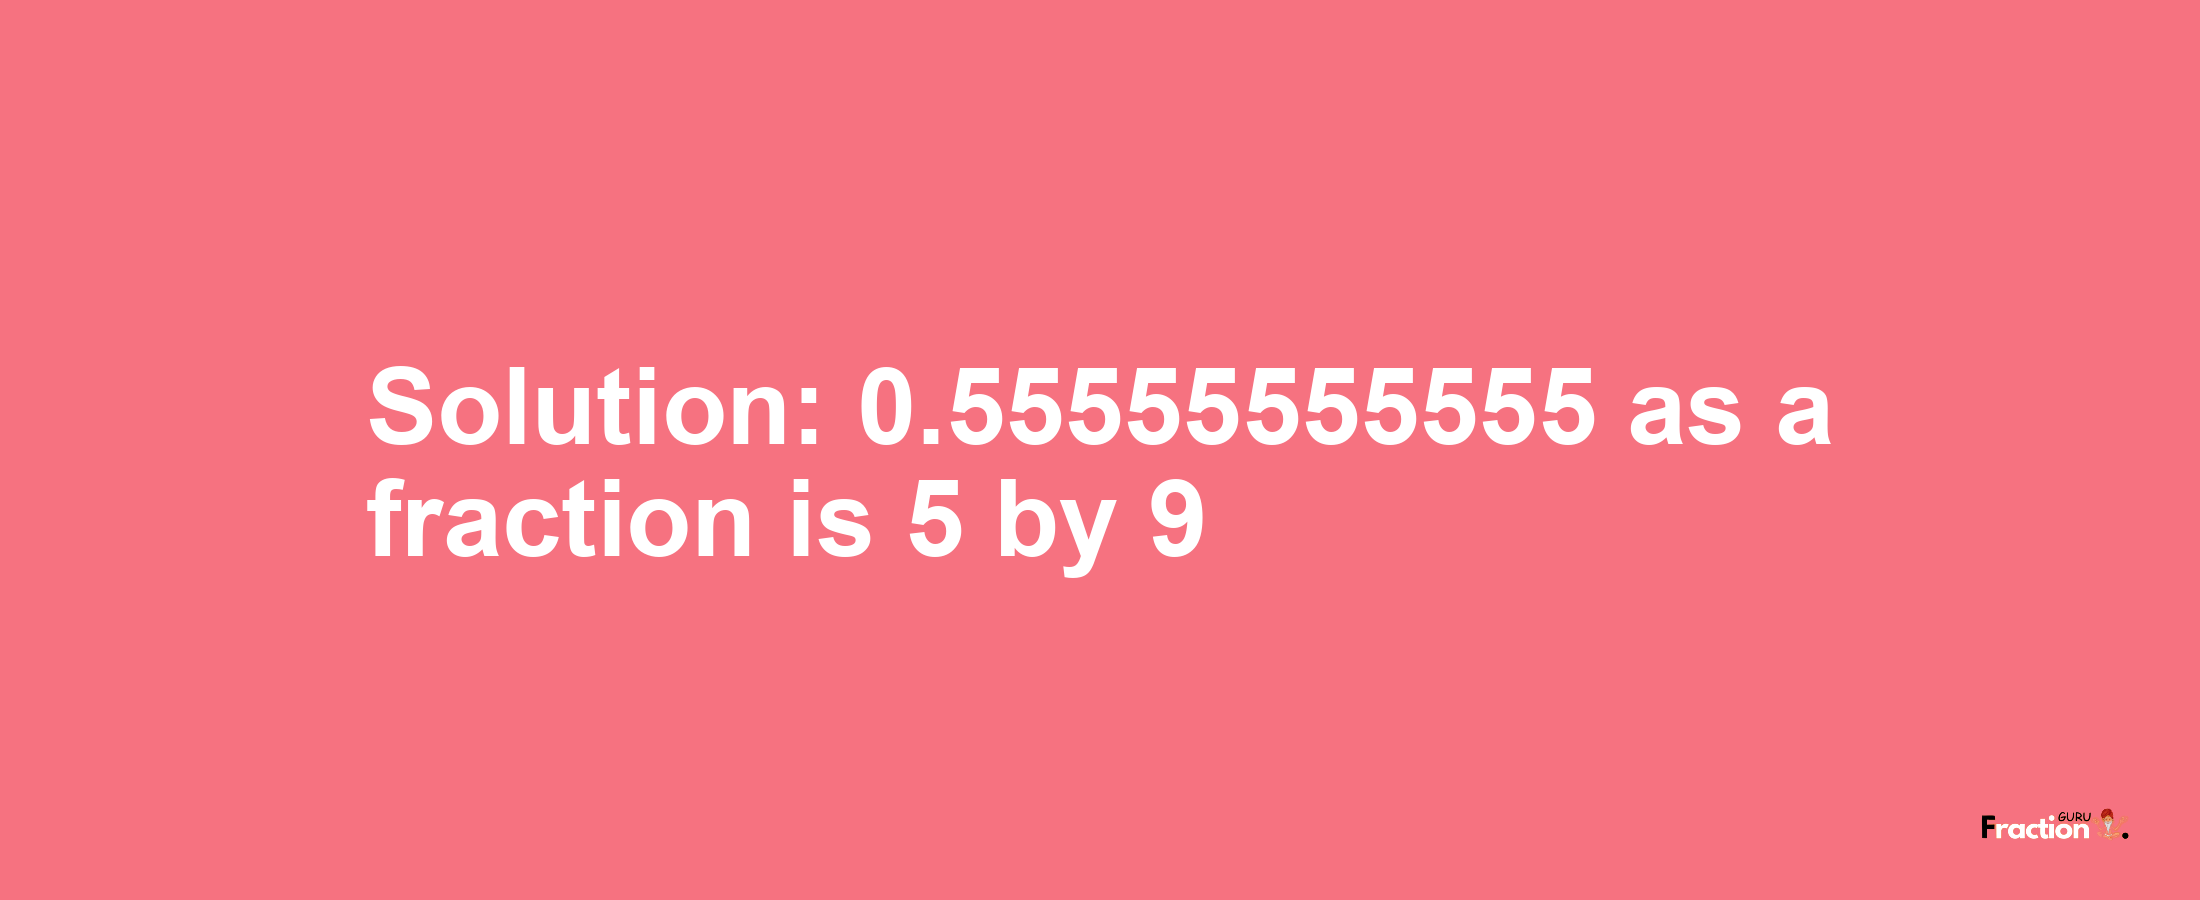 Solution:0.55555555555 as a fraction is 5/9